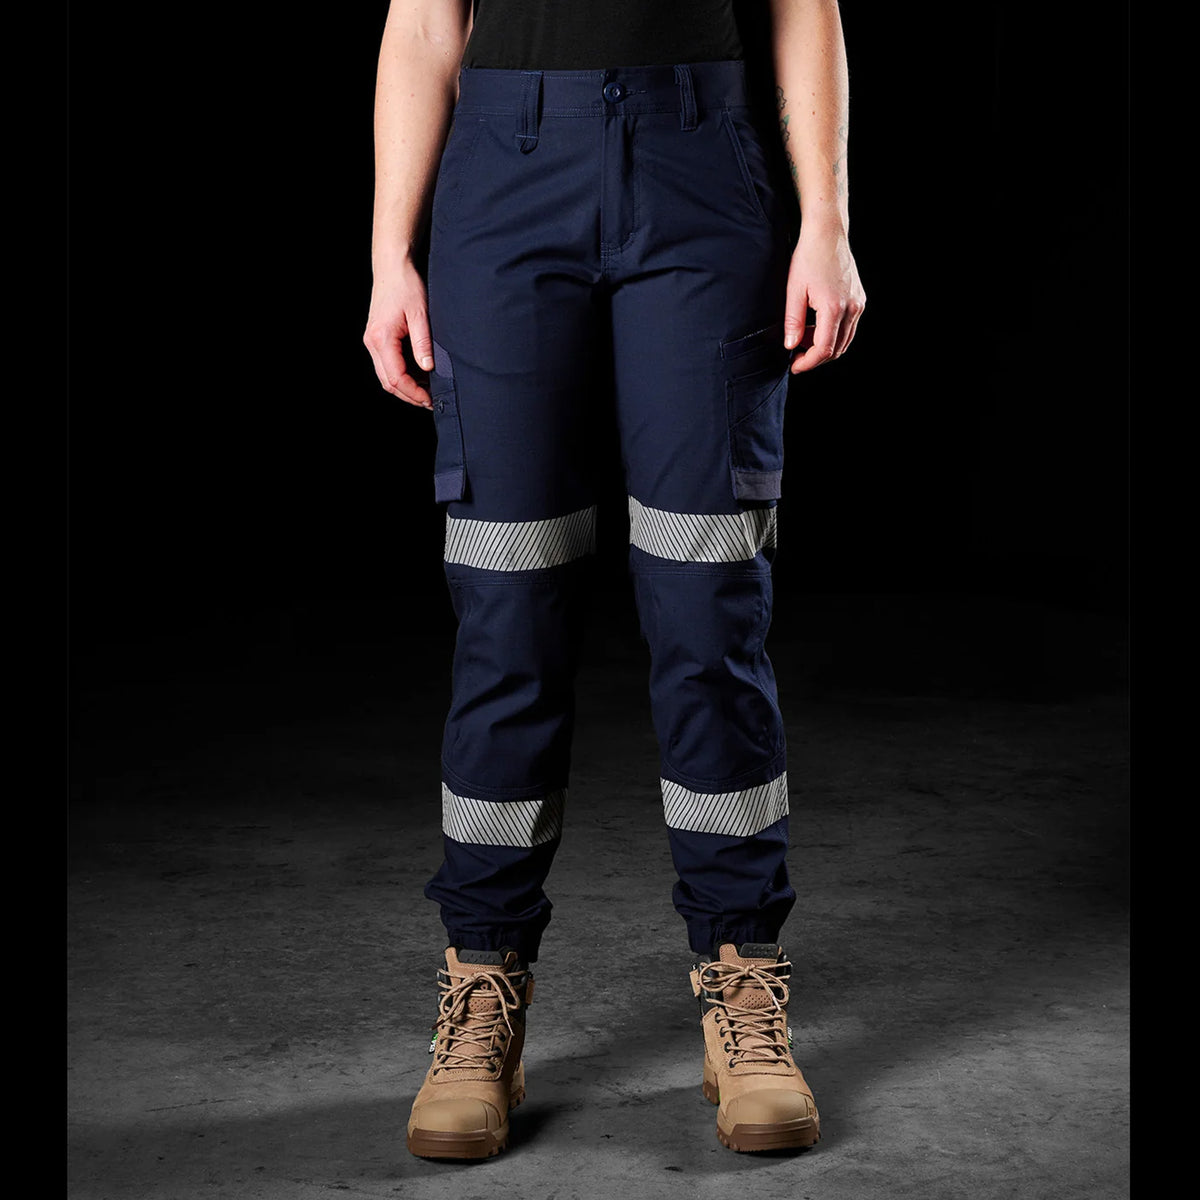 WOMENS REFLECTIVE CUFFED STRETCH RIPSTOP WORK PANTS - WP-8WT